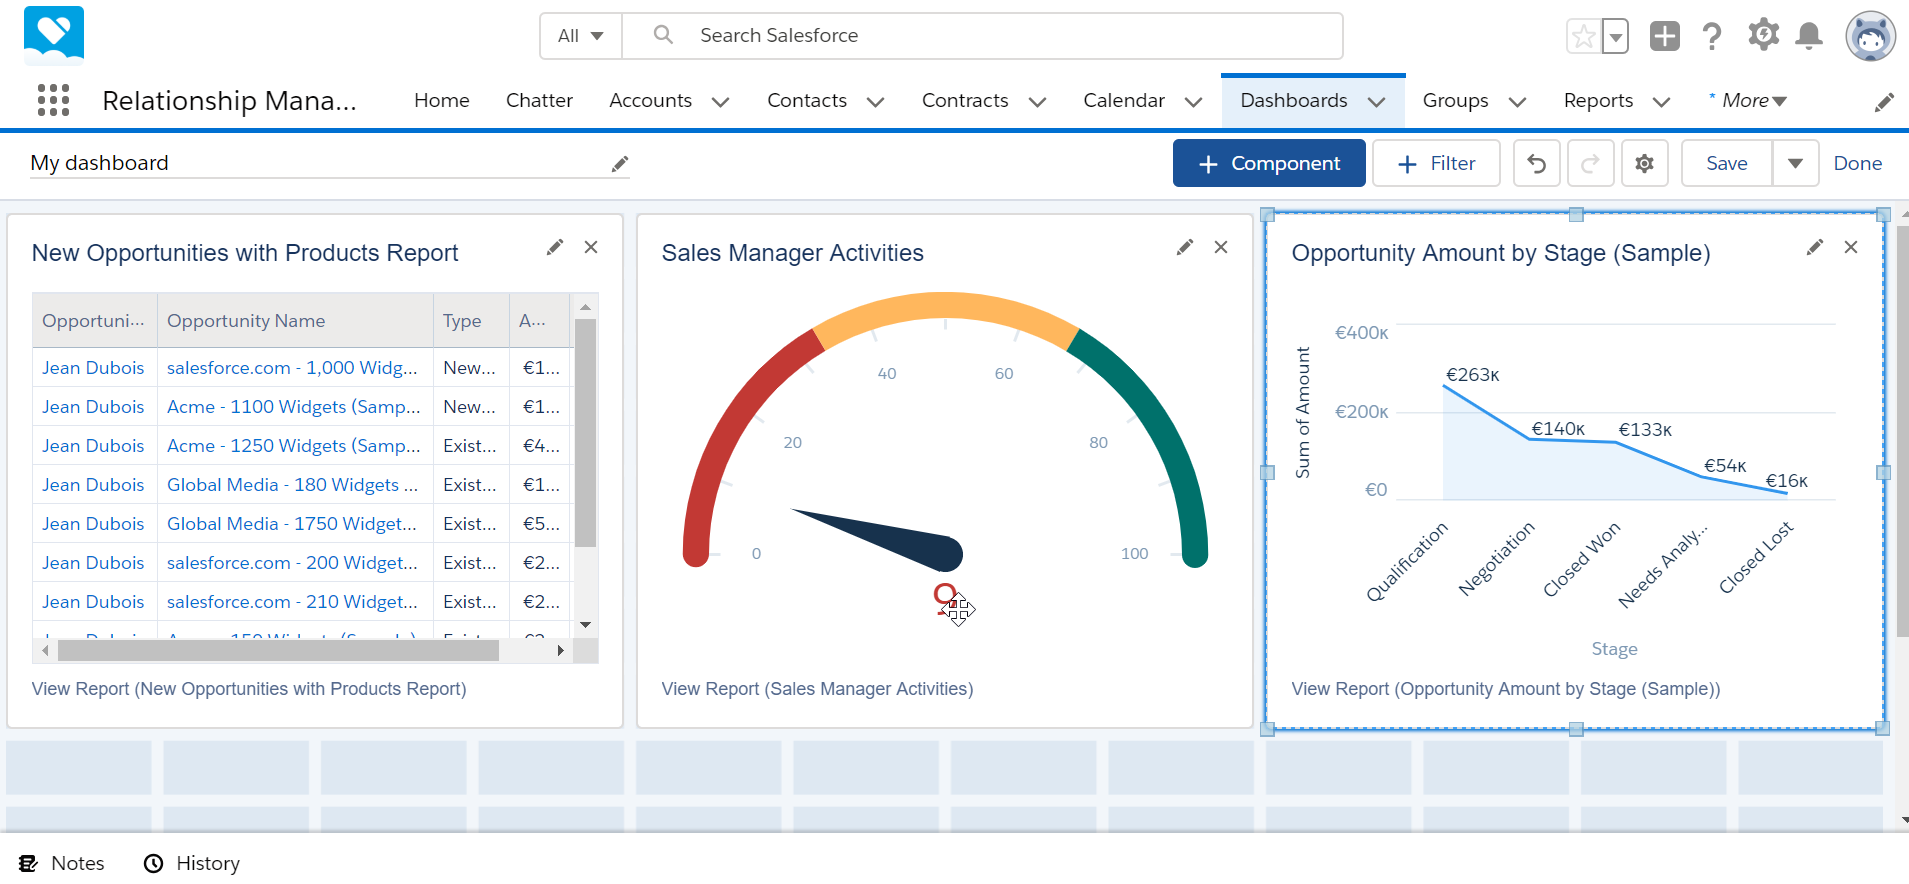 How to create a dashboard in SalesForce Lightning? : Dashboard created in SalesForce